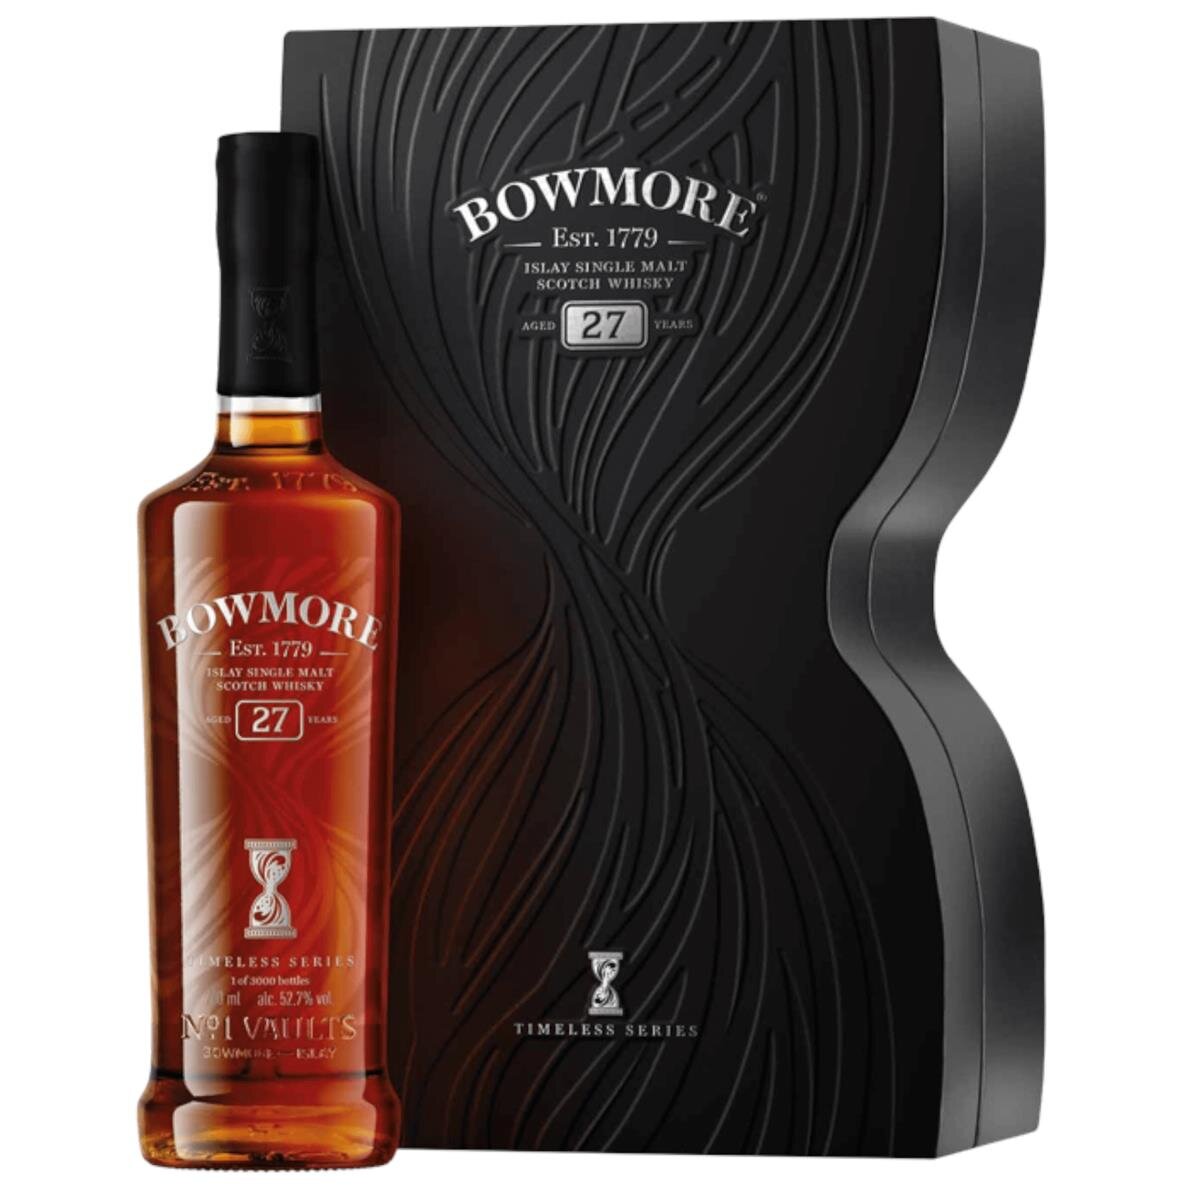 Geschenkbo 52,7% in Bowmore Series Vol. 0,7l Years 27 Whisky Timeless